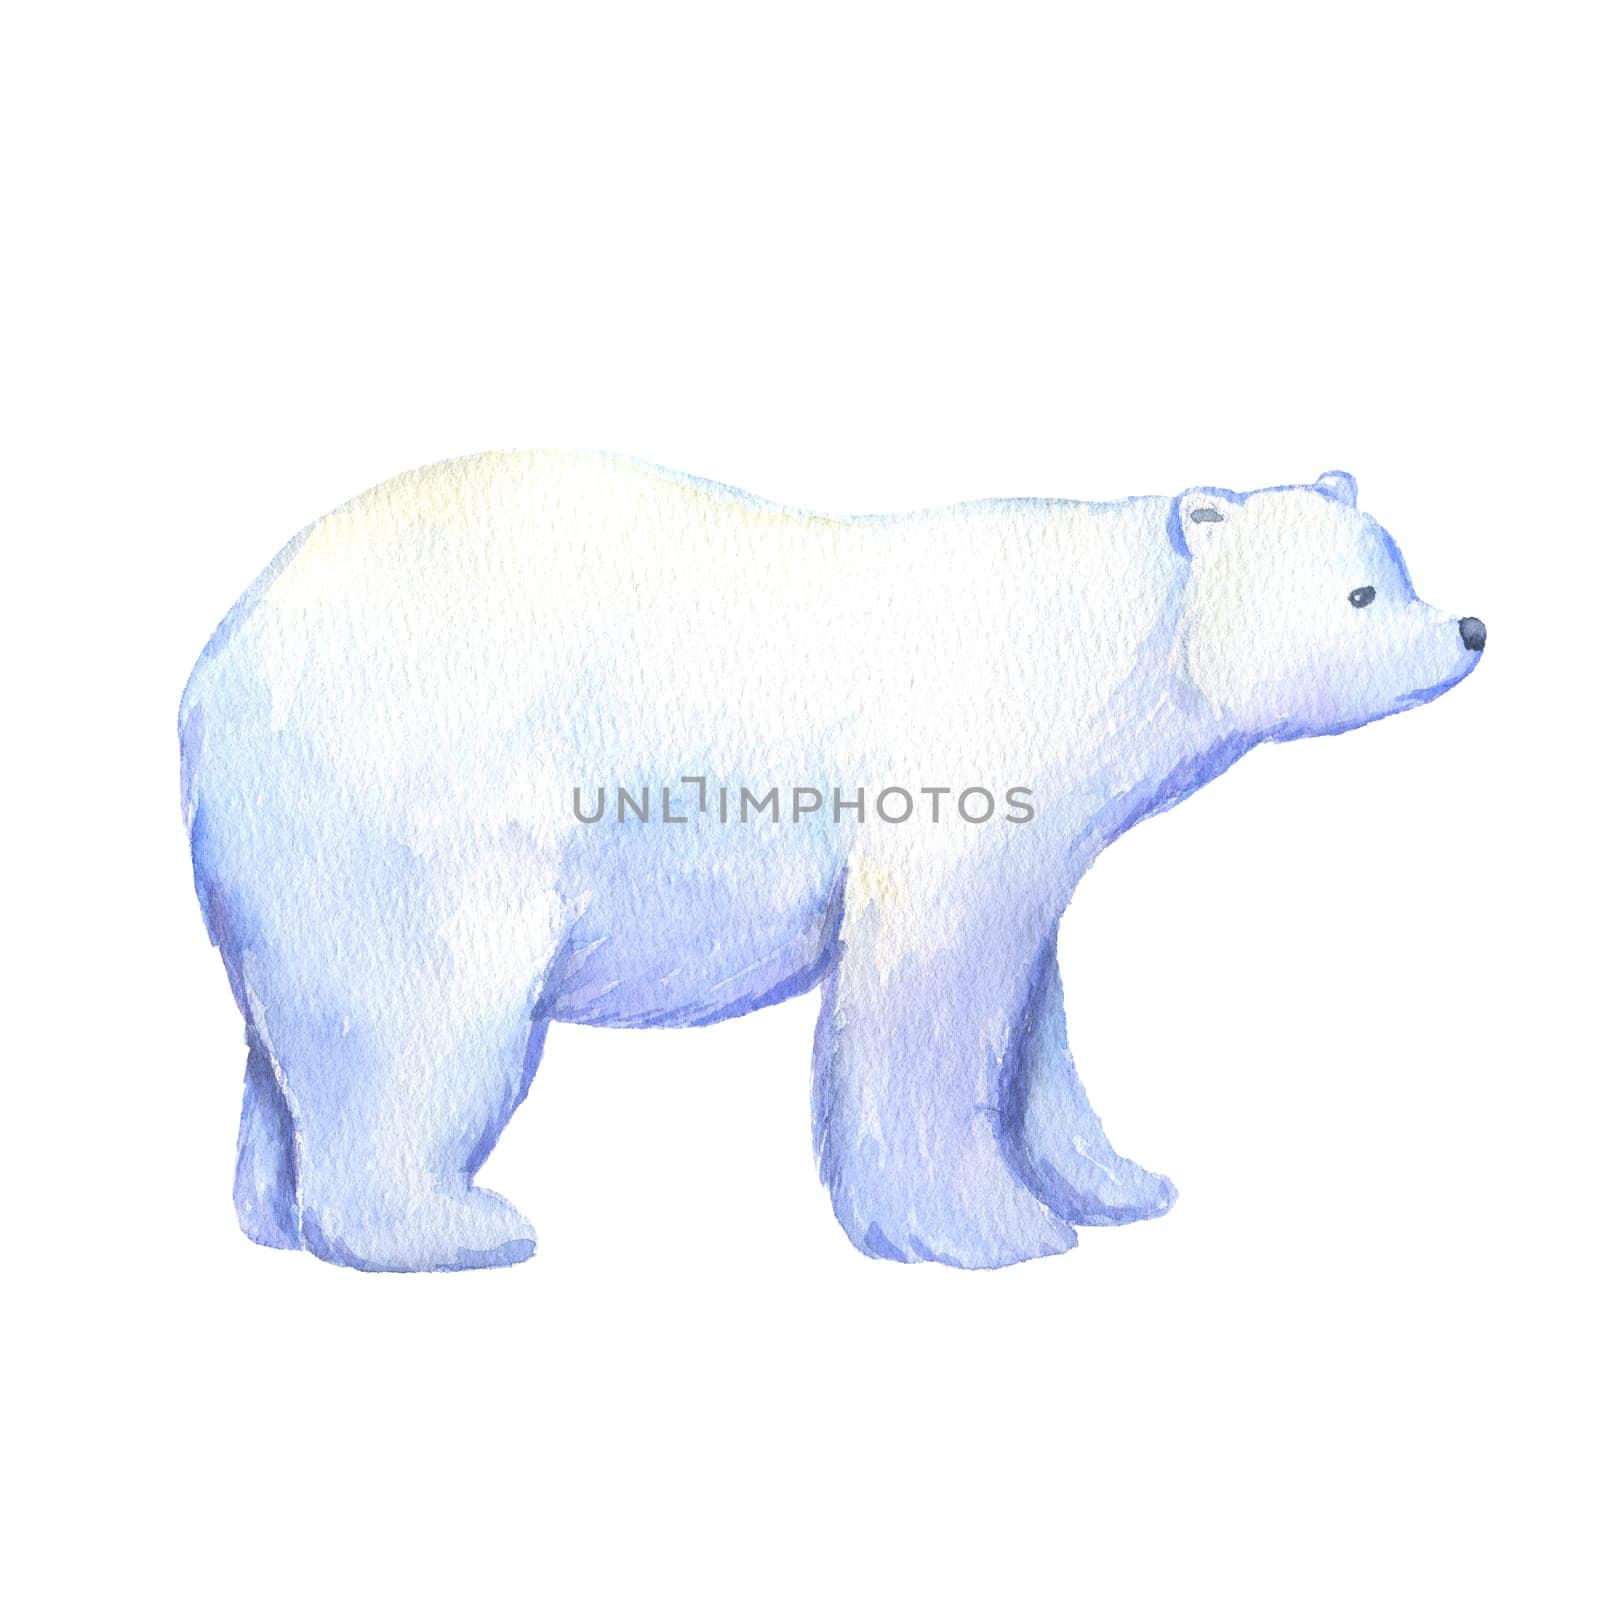 Adult polar bear. Watercolor hand drawn illustration isolated on white. North animal.